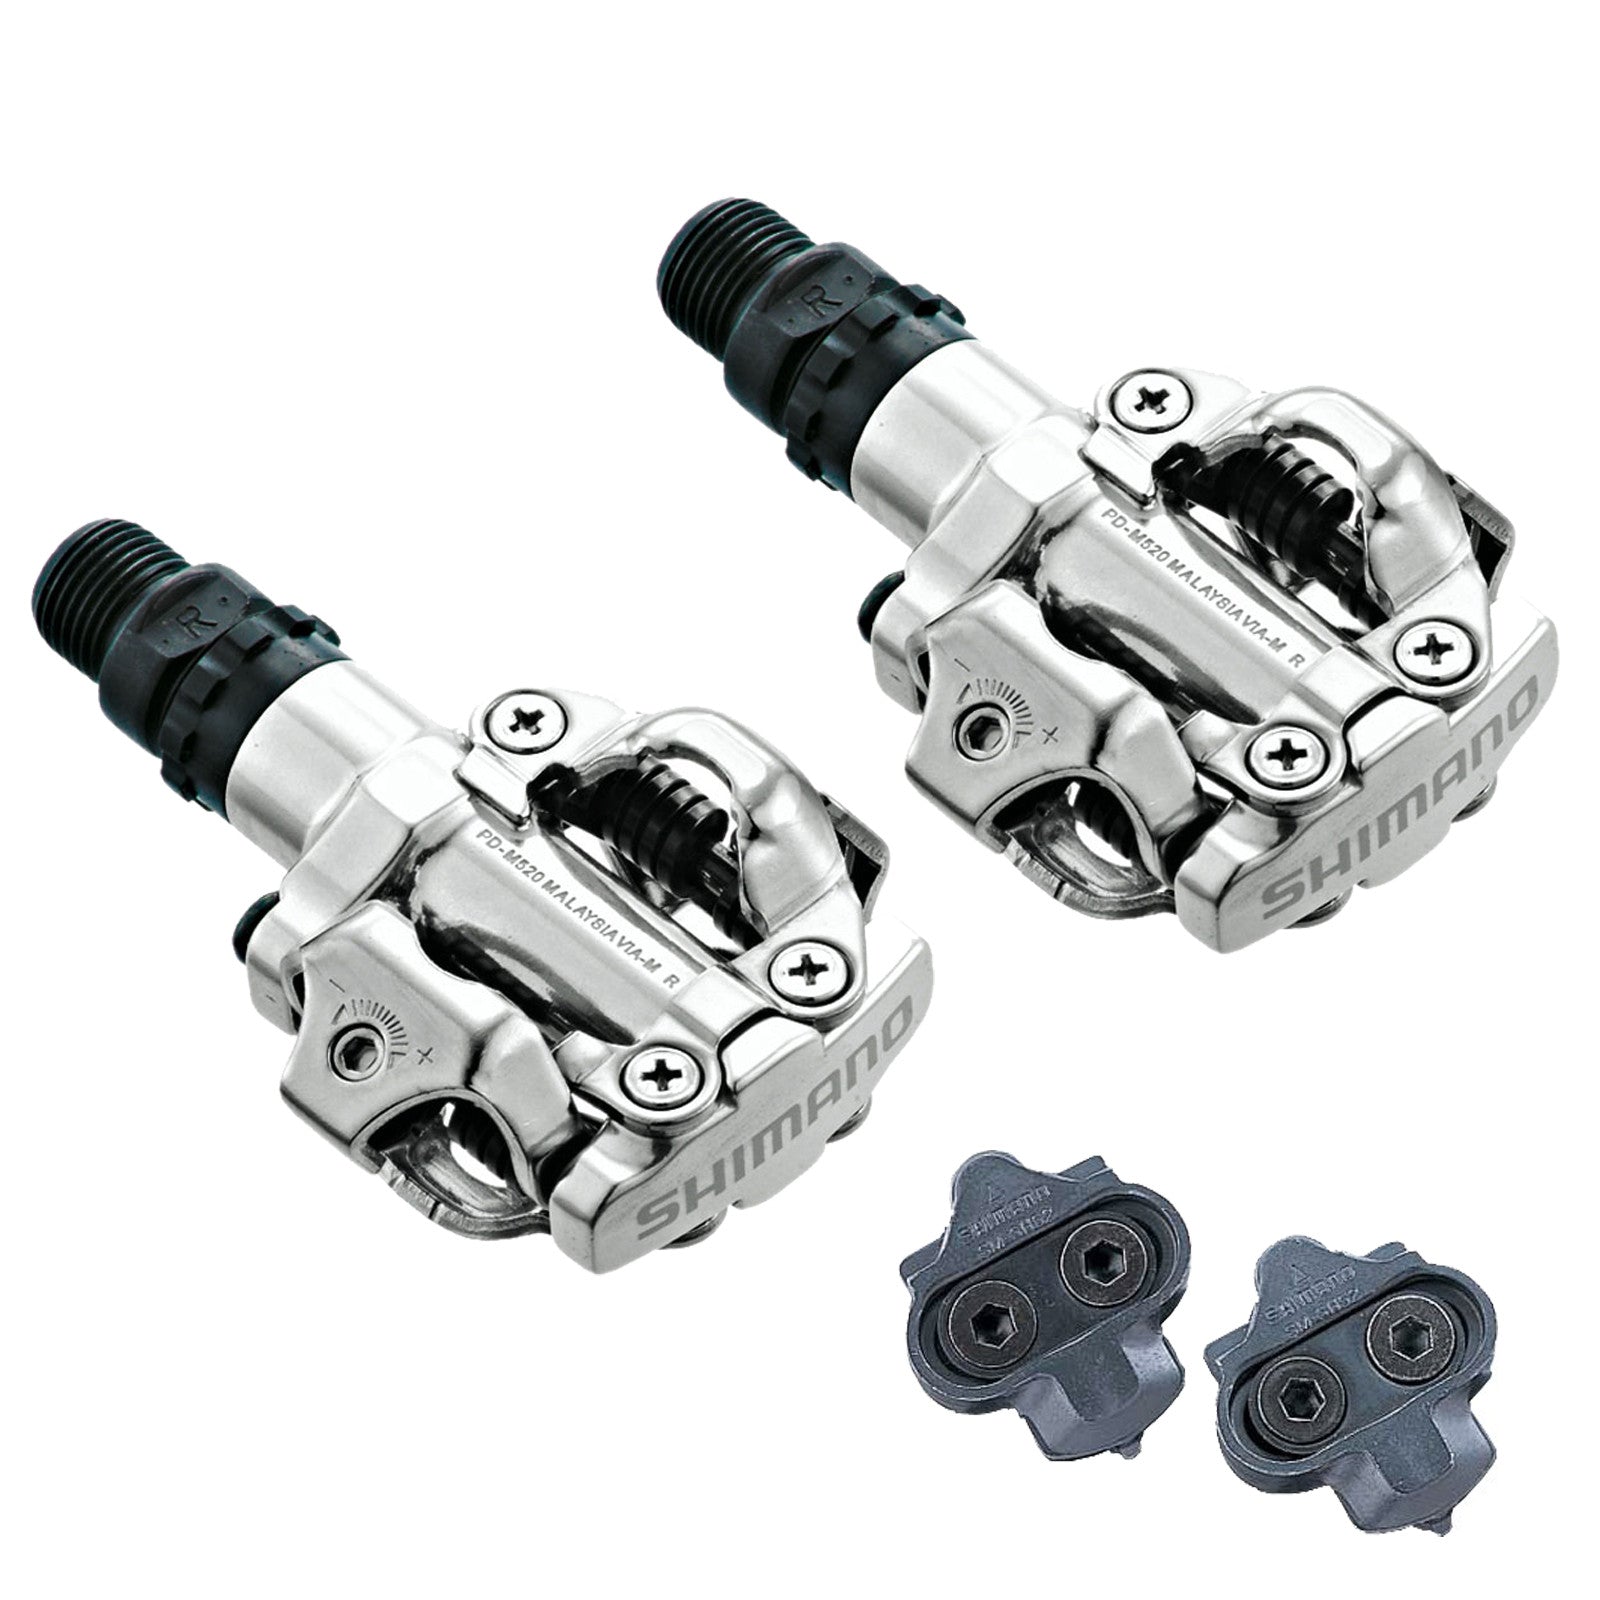 Shimano PD-M520 SPD Clipless Bike Pedals